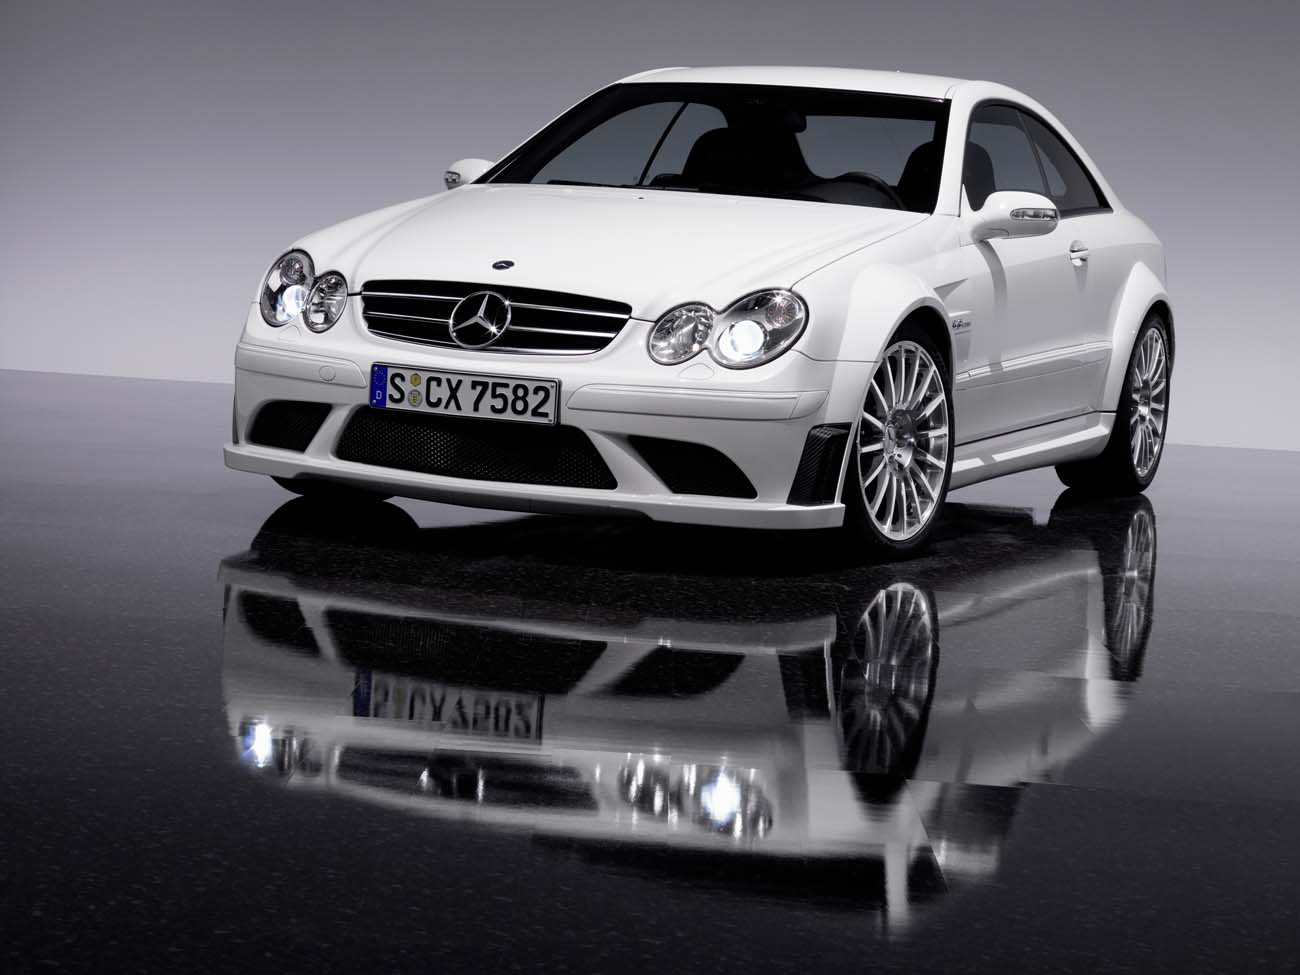 Mercedes-Benz CLK 63 AMG Black Series Coupé C 209. Photo from 2007.